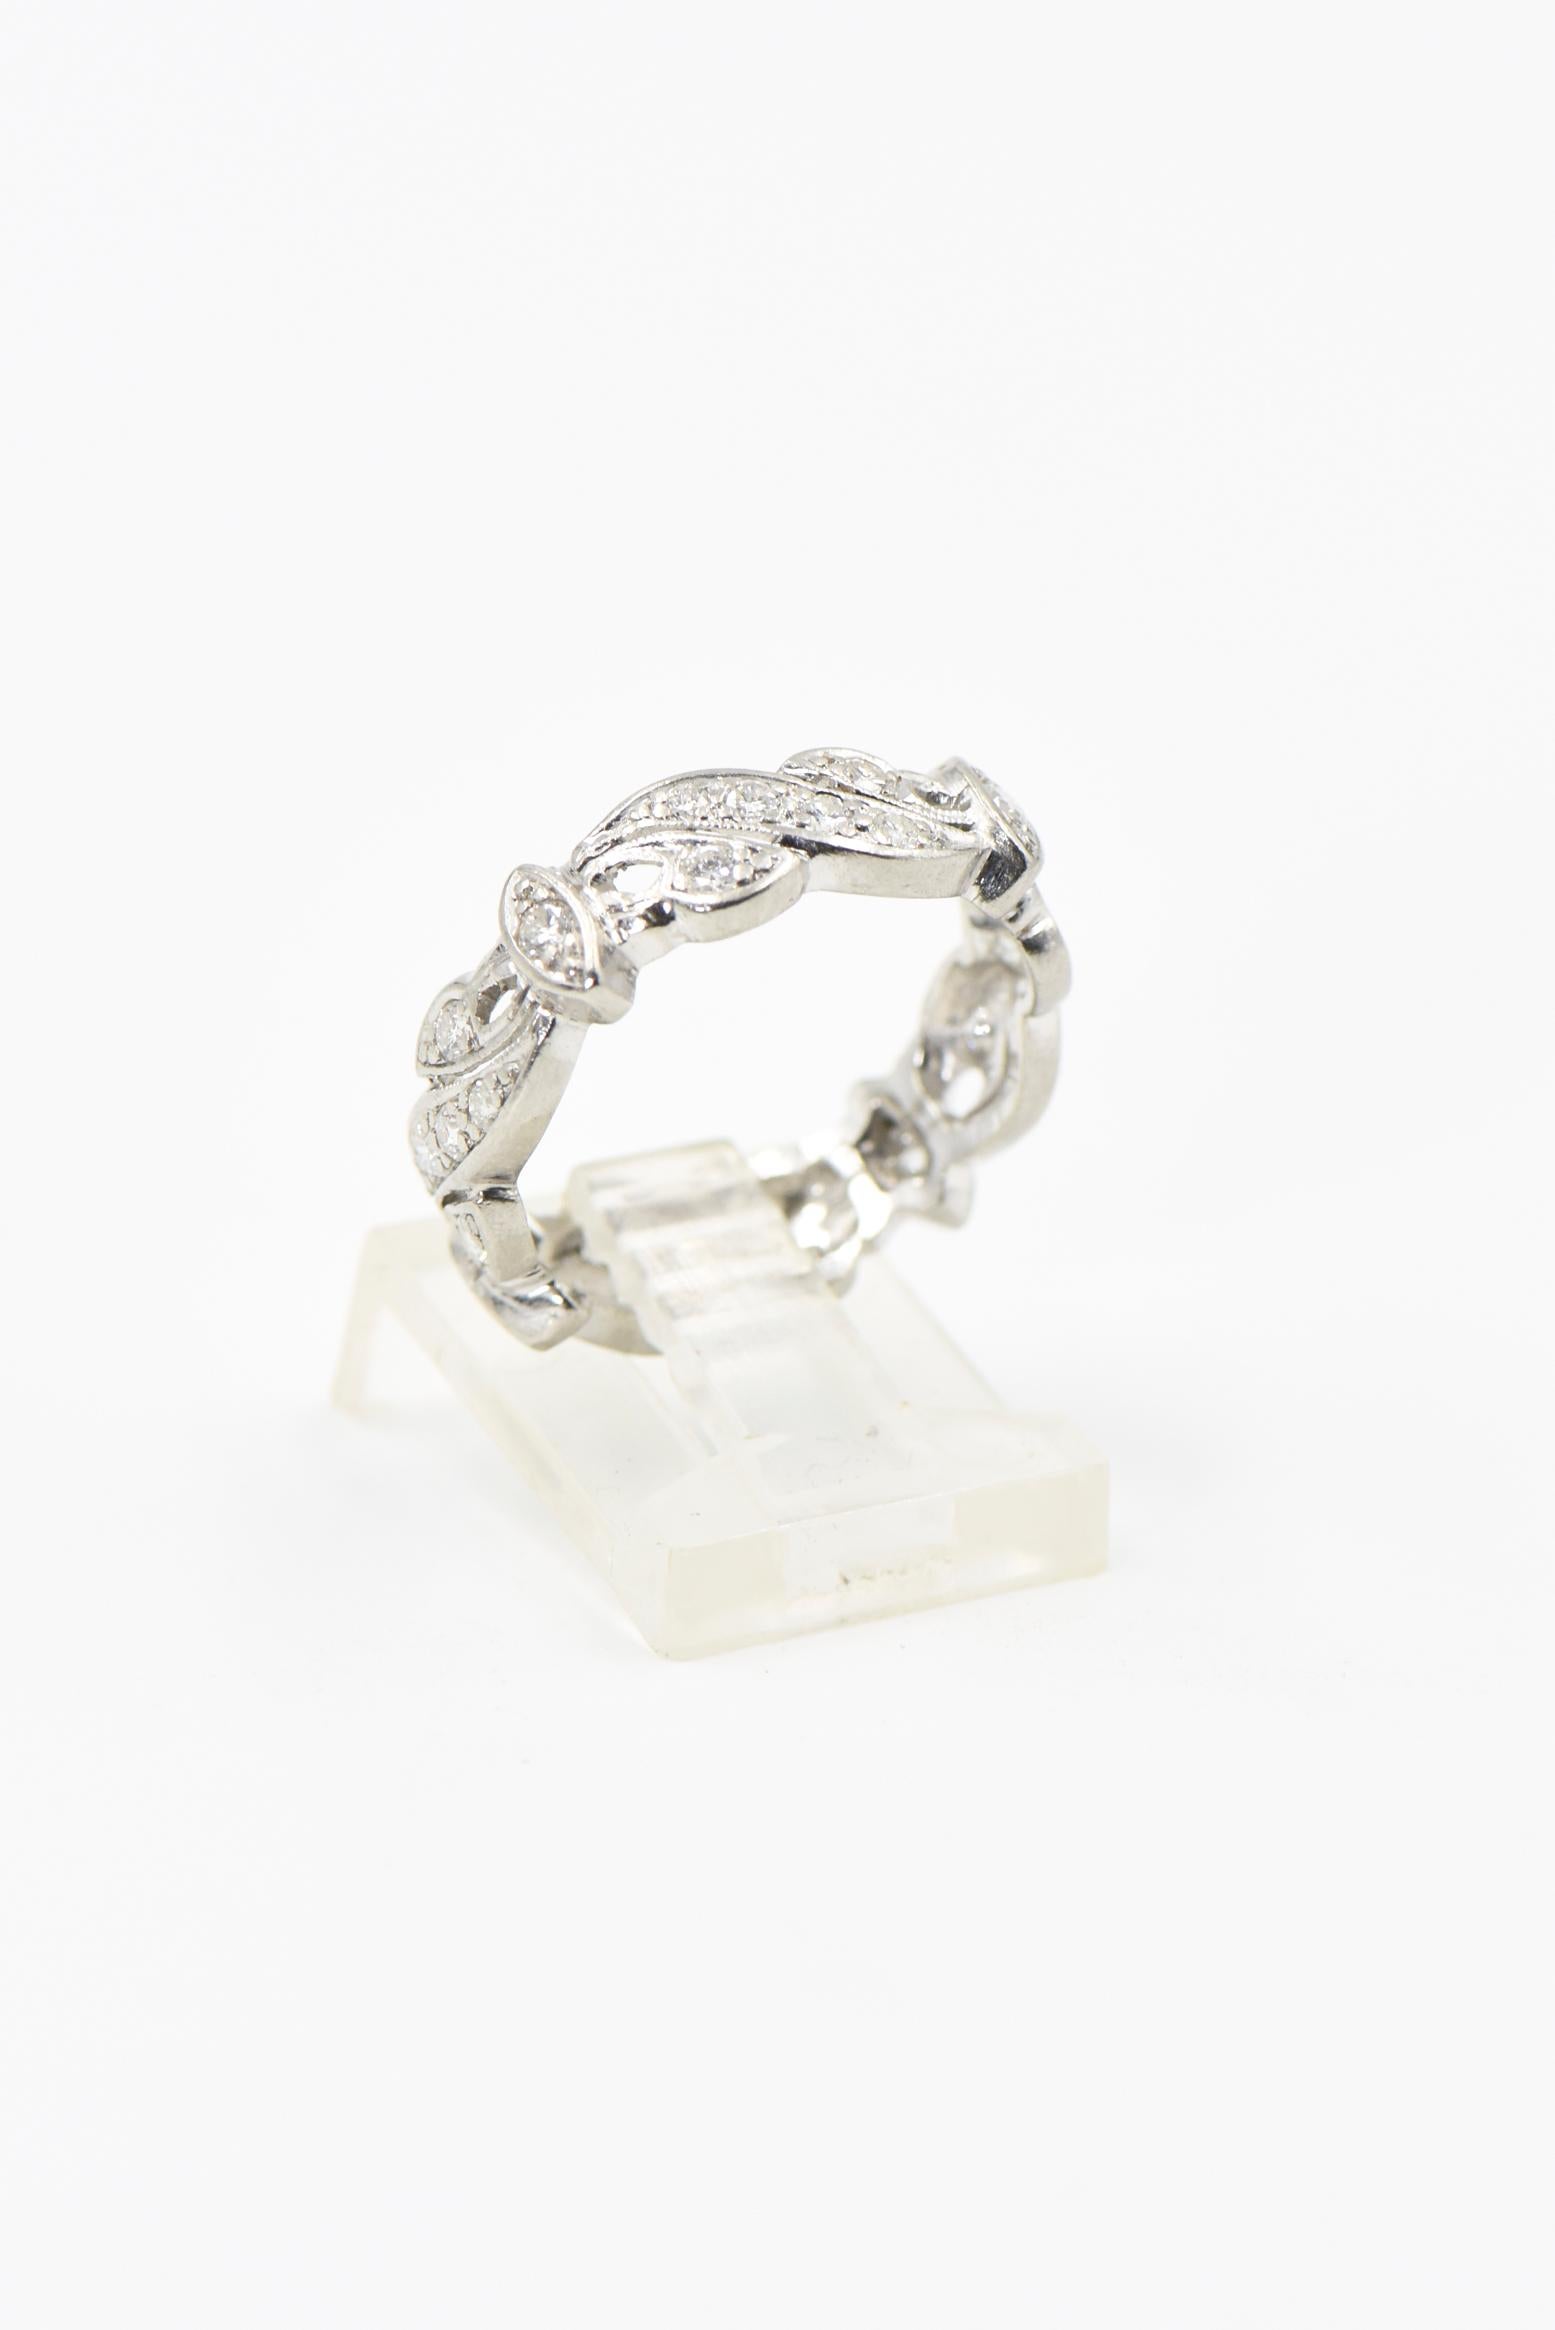 Garland style diamond eternity band featuring alternating sections one with a diamond in a marquis shaped plaque and the other with swag and vine design.  There are 4 sections of each containing a total of 28 diamonds.  The approximate total diamond